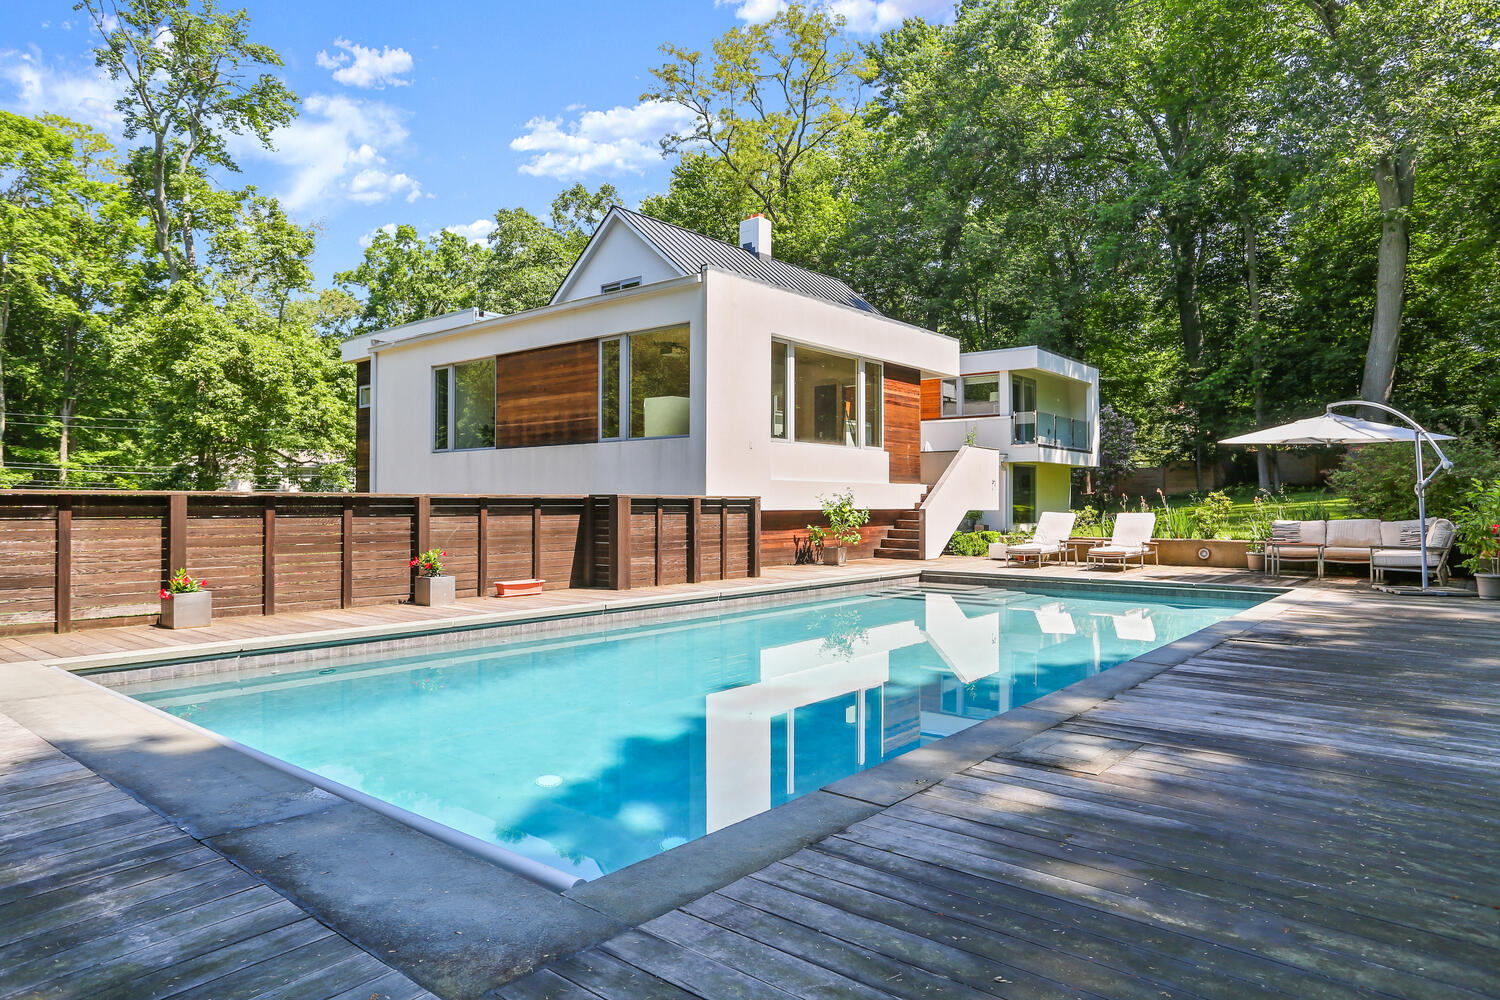 Westport home inspired by mid-century design listed for $2.75M